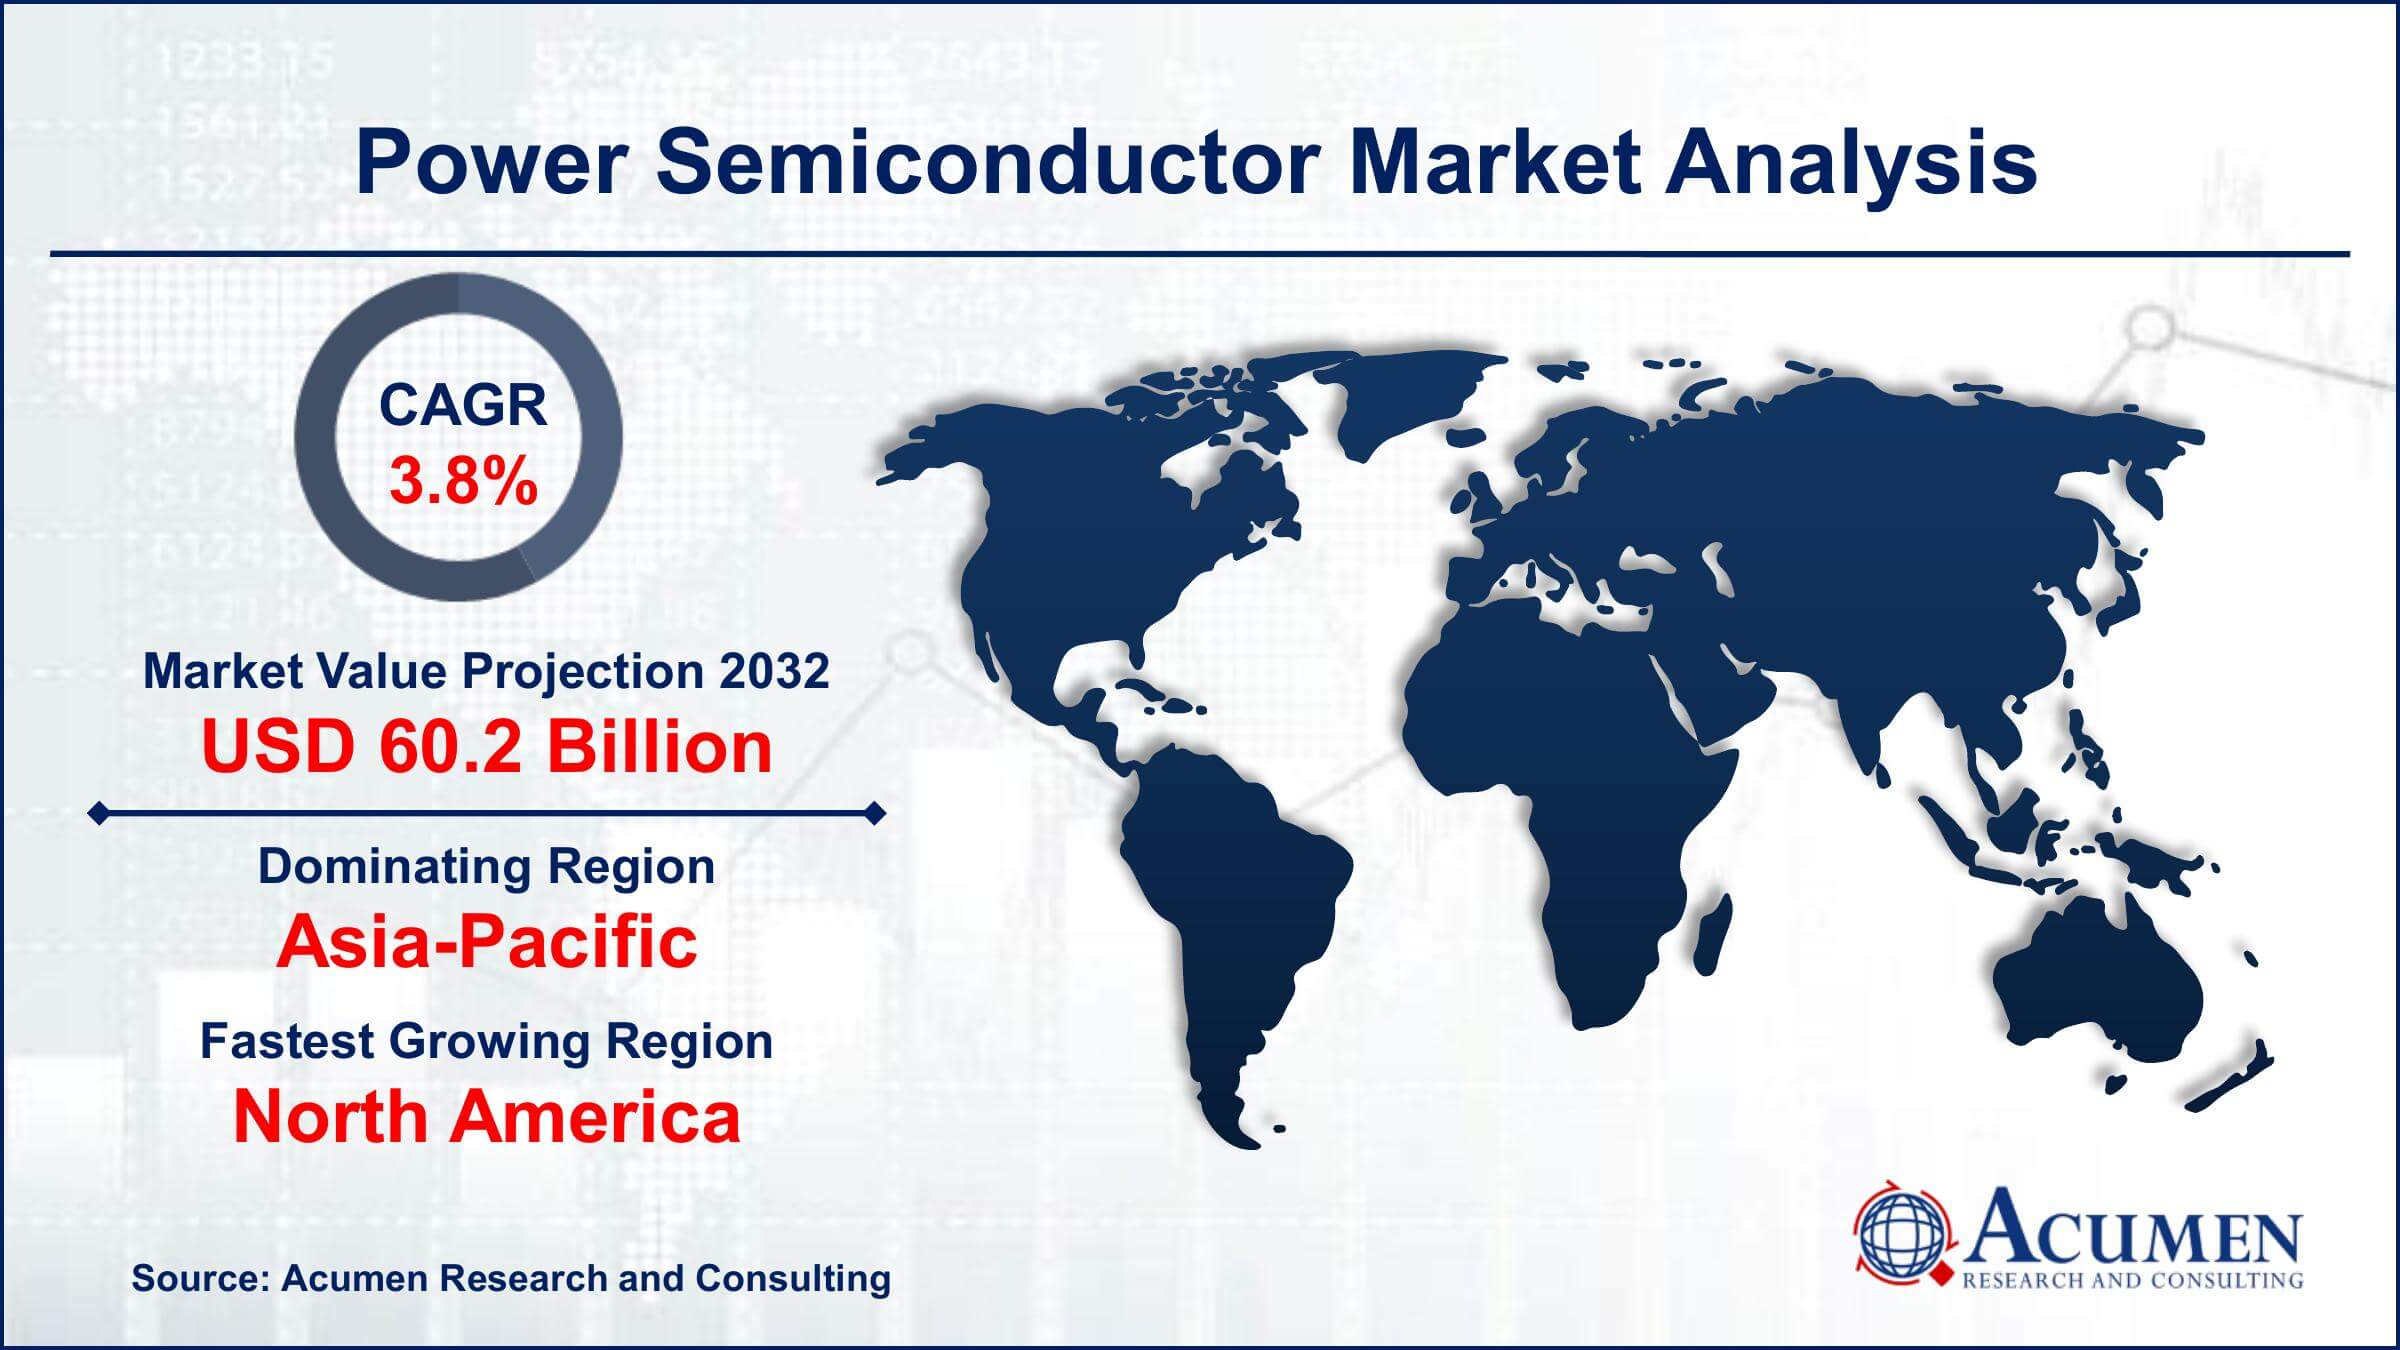 Global Power Semiconductor Market Trends